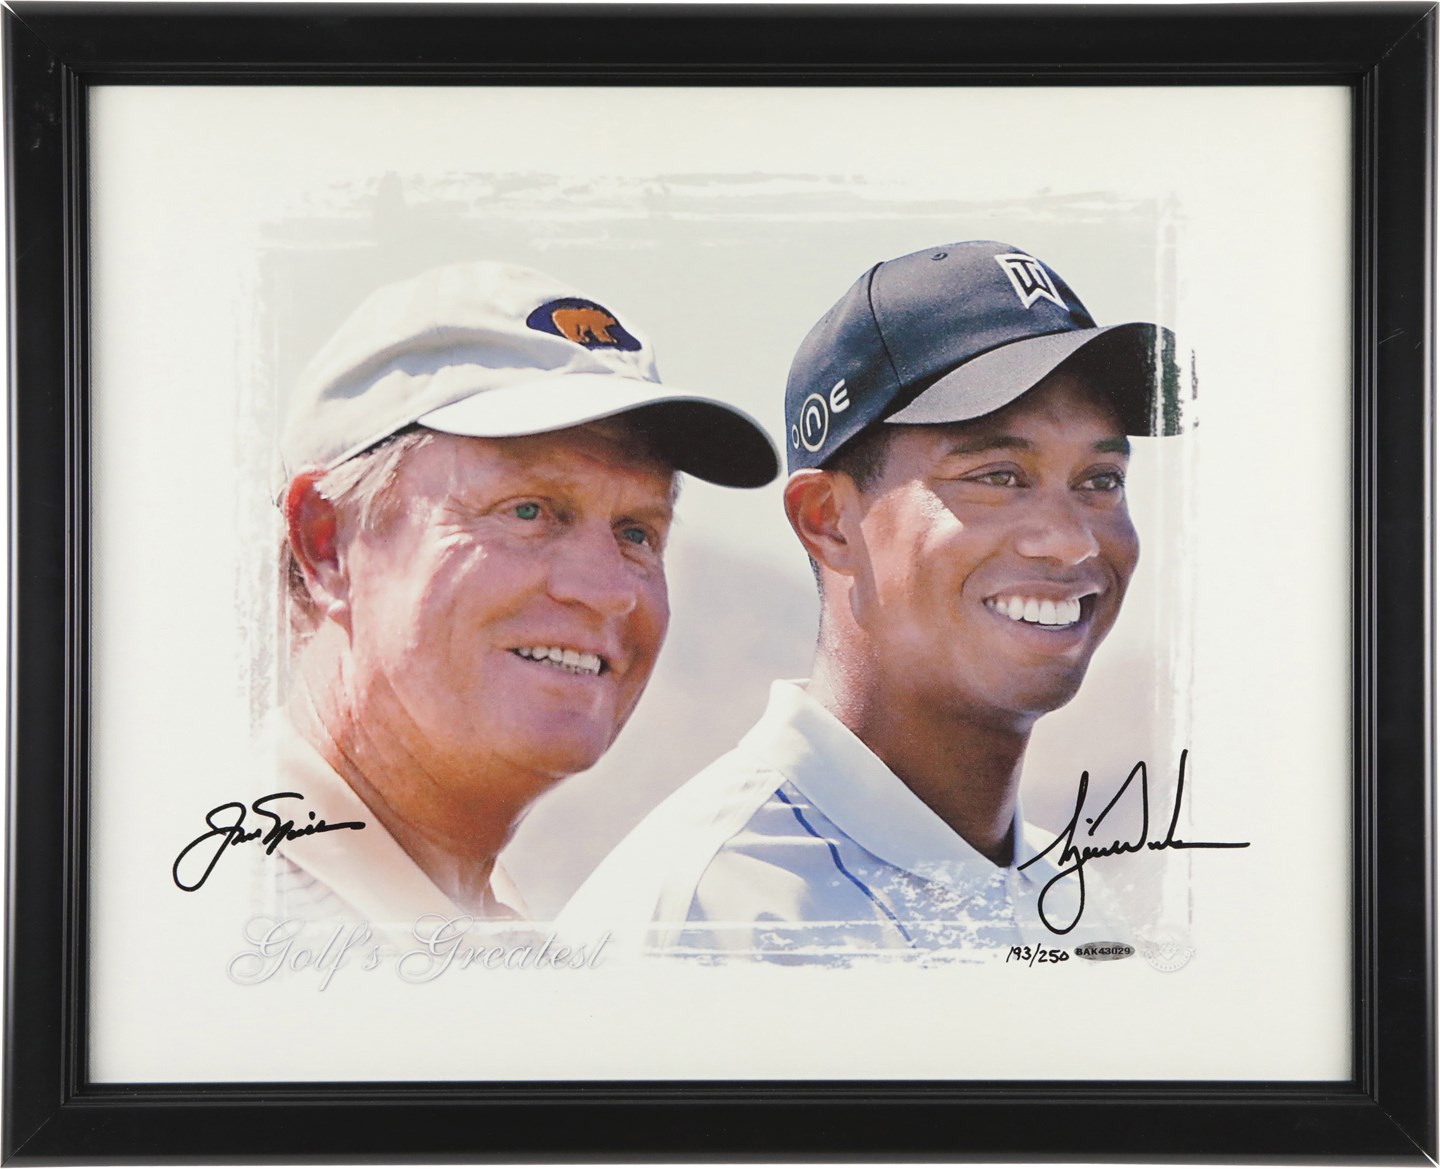 Olympics and All Sports - Tiger Woods & Jack Nicklaus Dual-Signed "Golf's Greatest" Framed Canvas LE 193/250 (UDA)